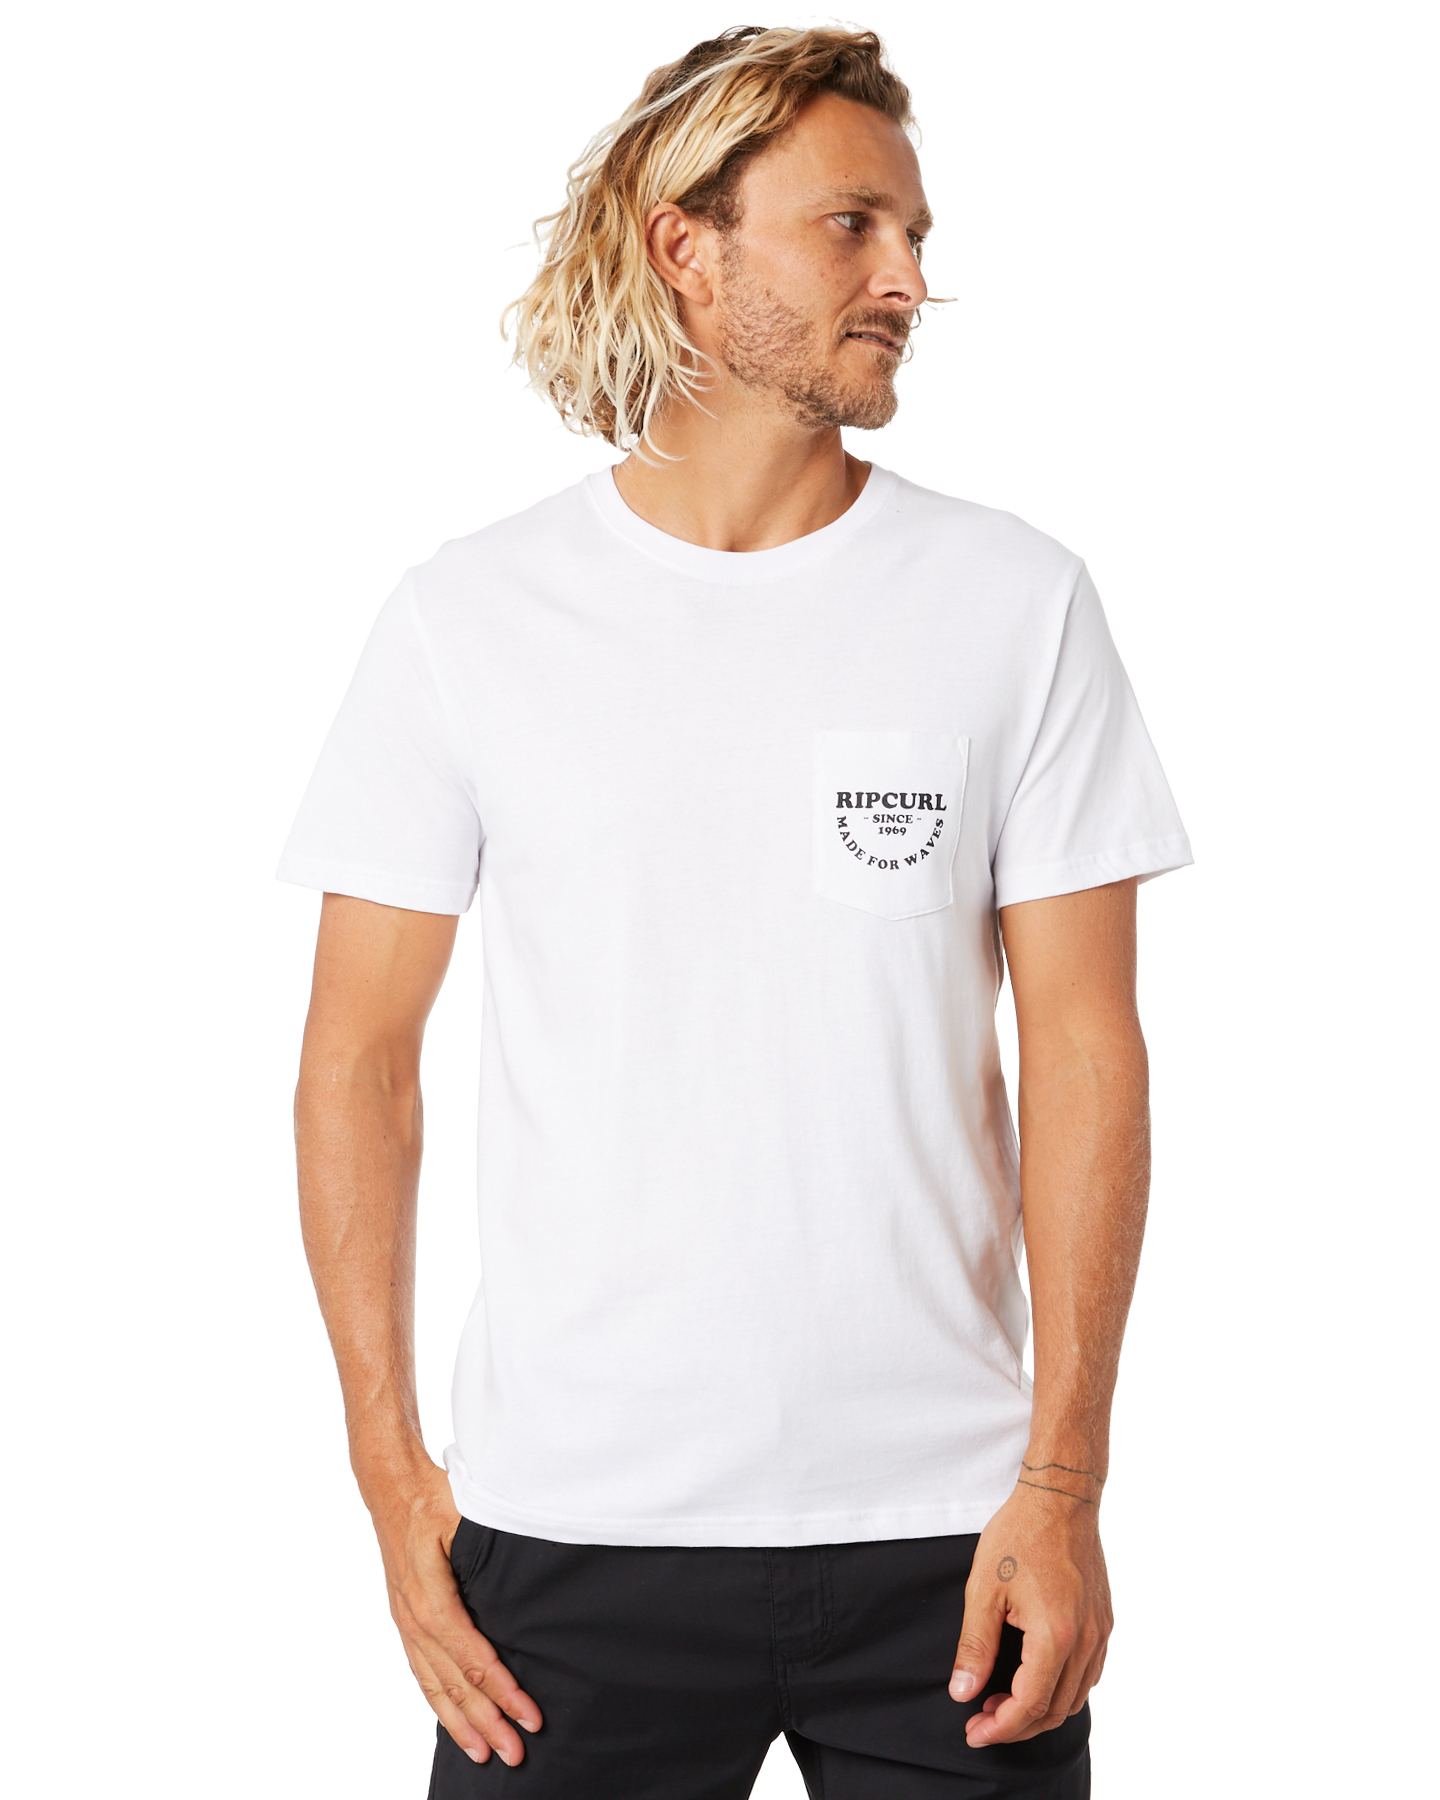 Rip Curl Made For Pocket Mens Tee - White | SurfStitch